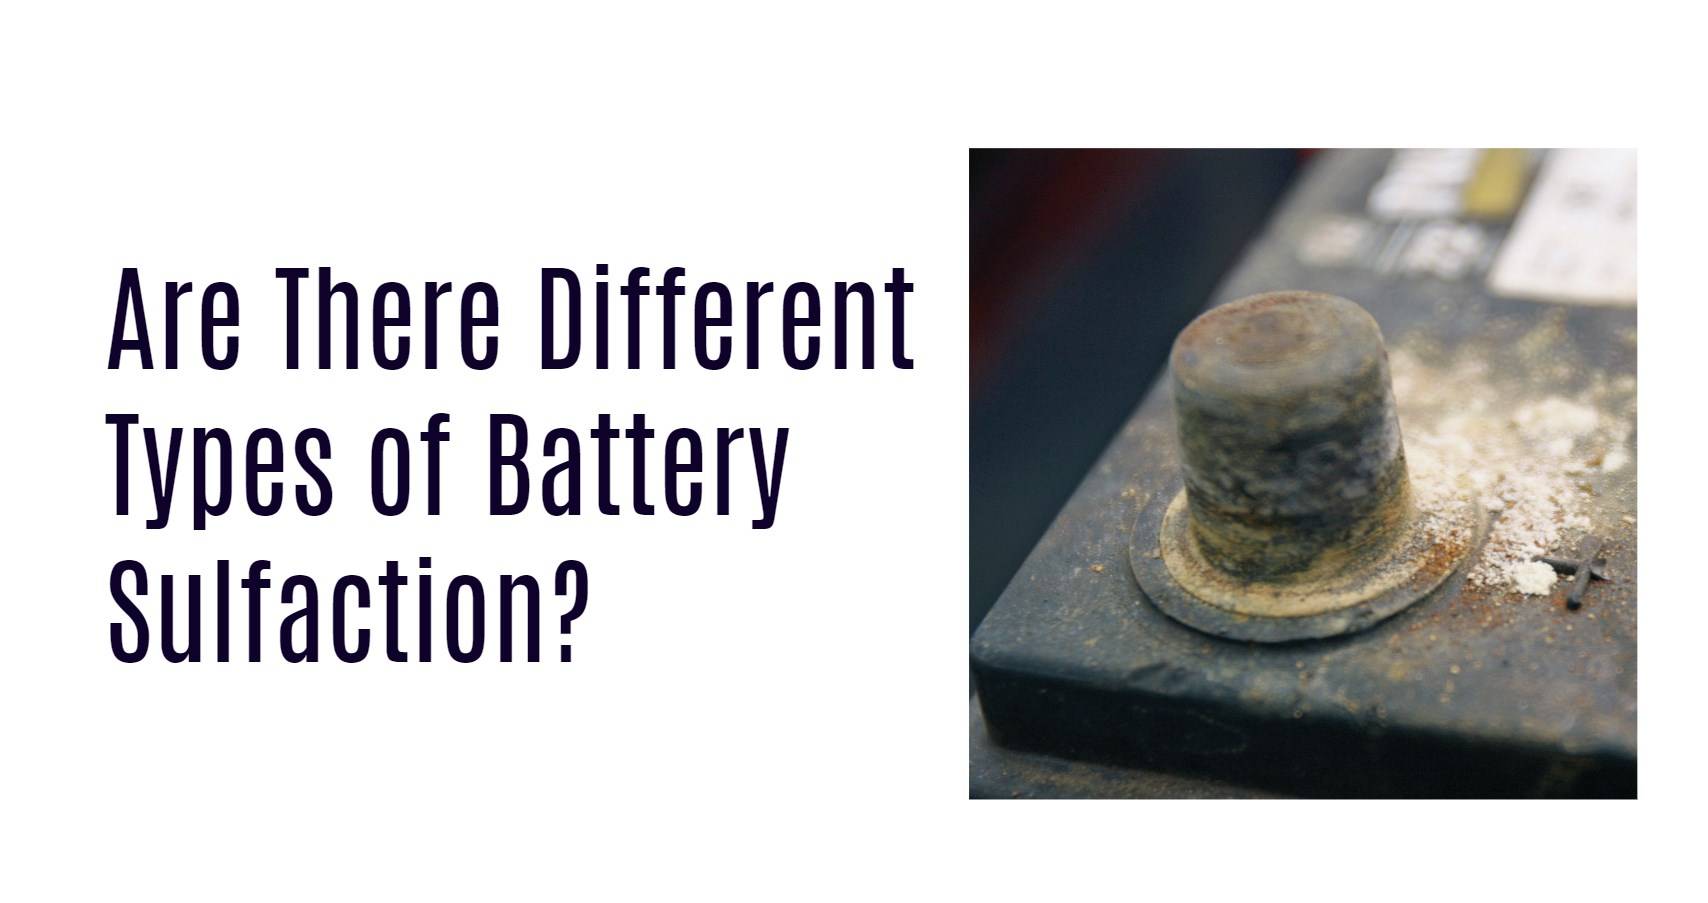 Are There Different Types of Battery Sulfaction?